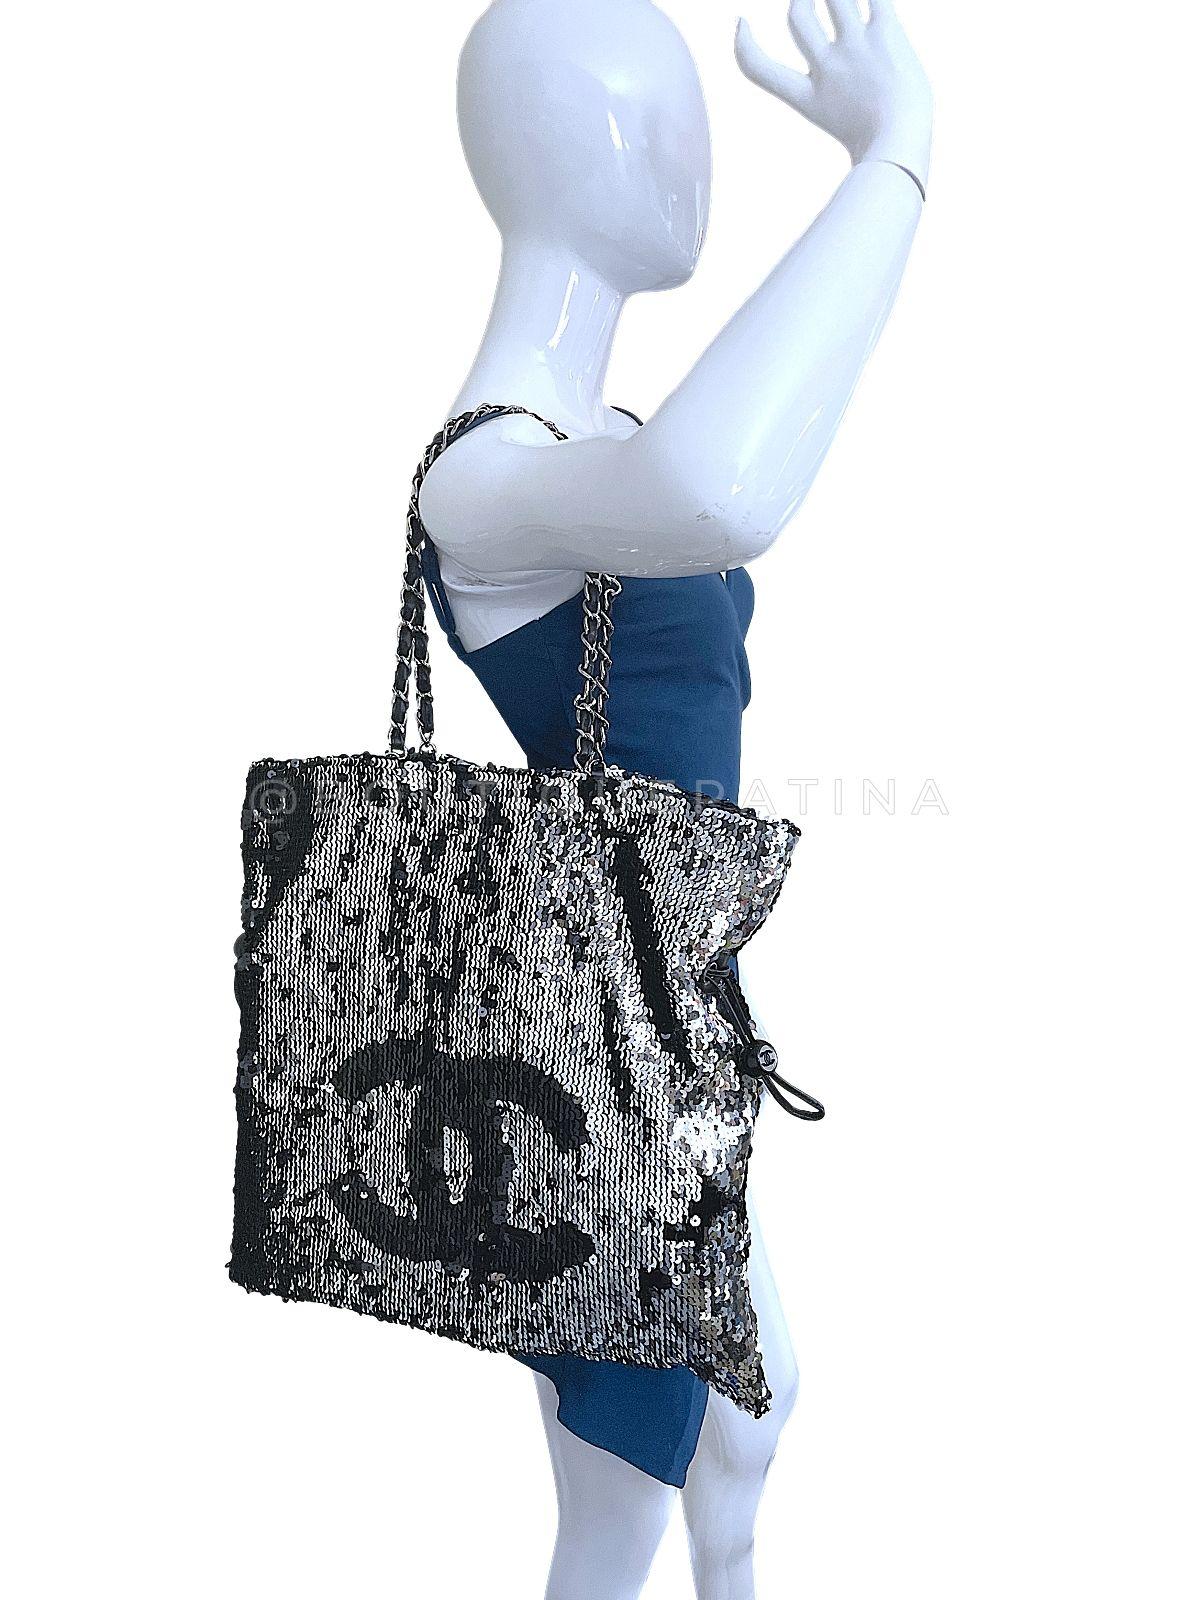 Chanel 2008 Limited XL Summer Nights Reversible Sequin Tote Bag 67793 For Sale 13